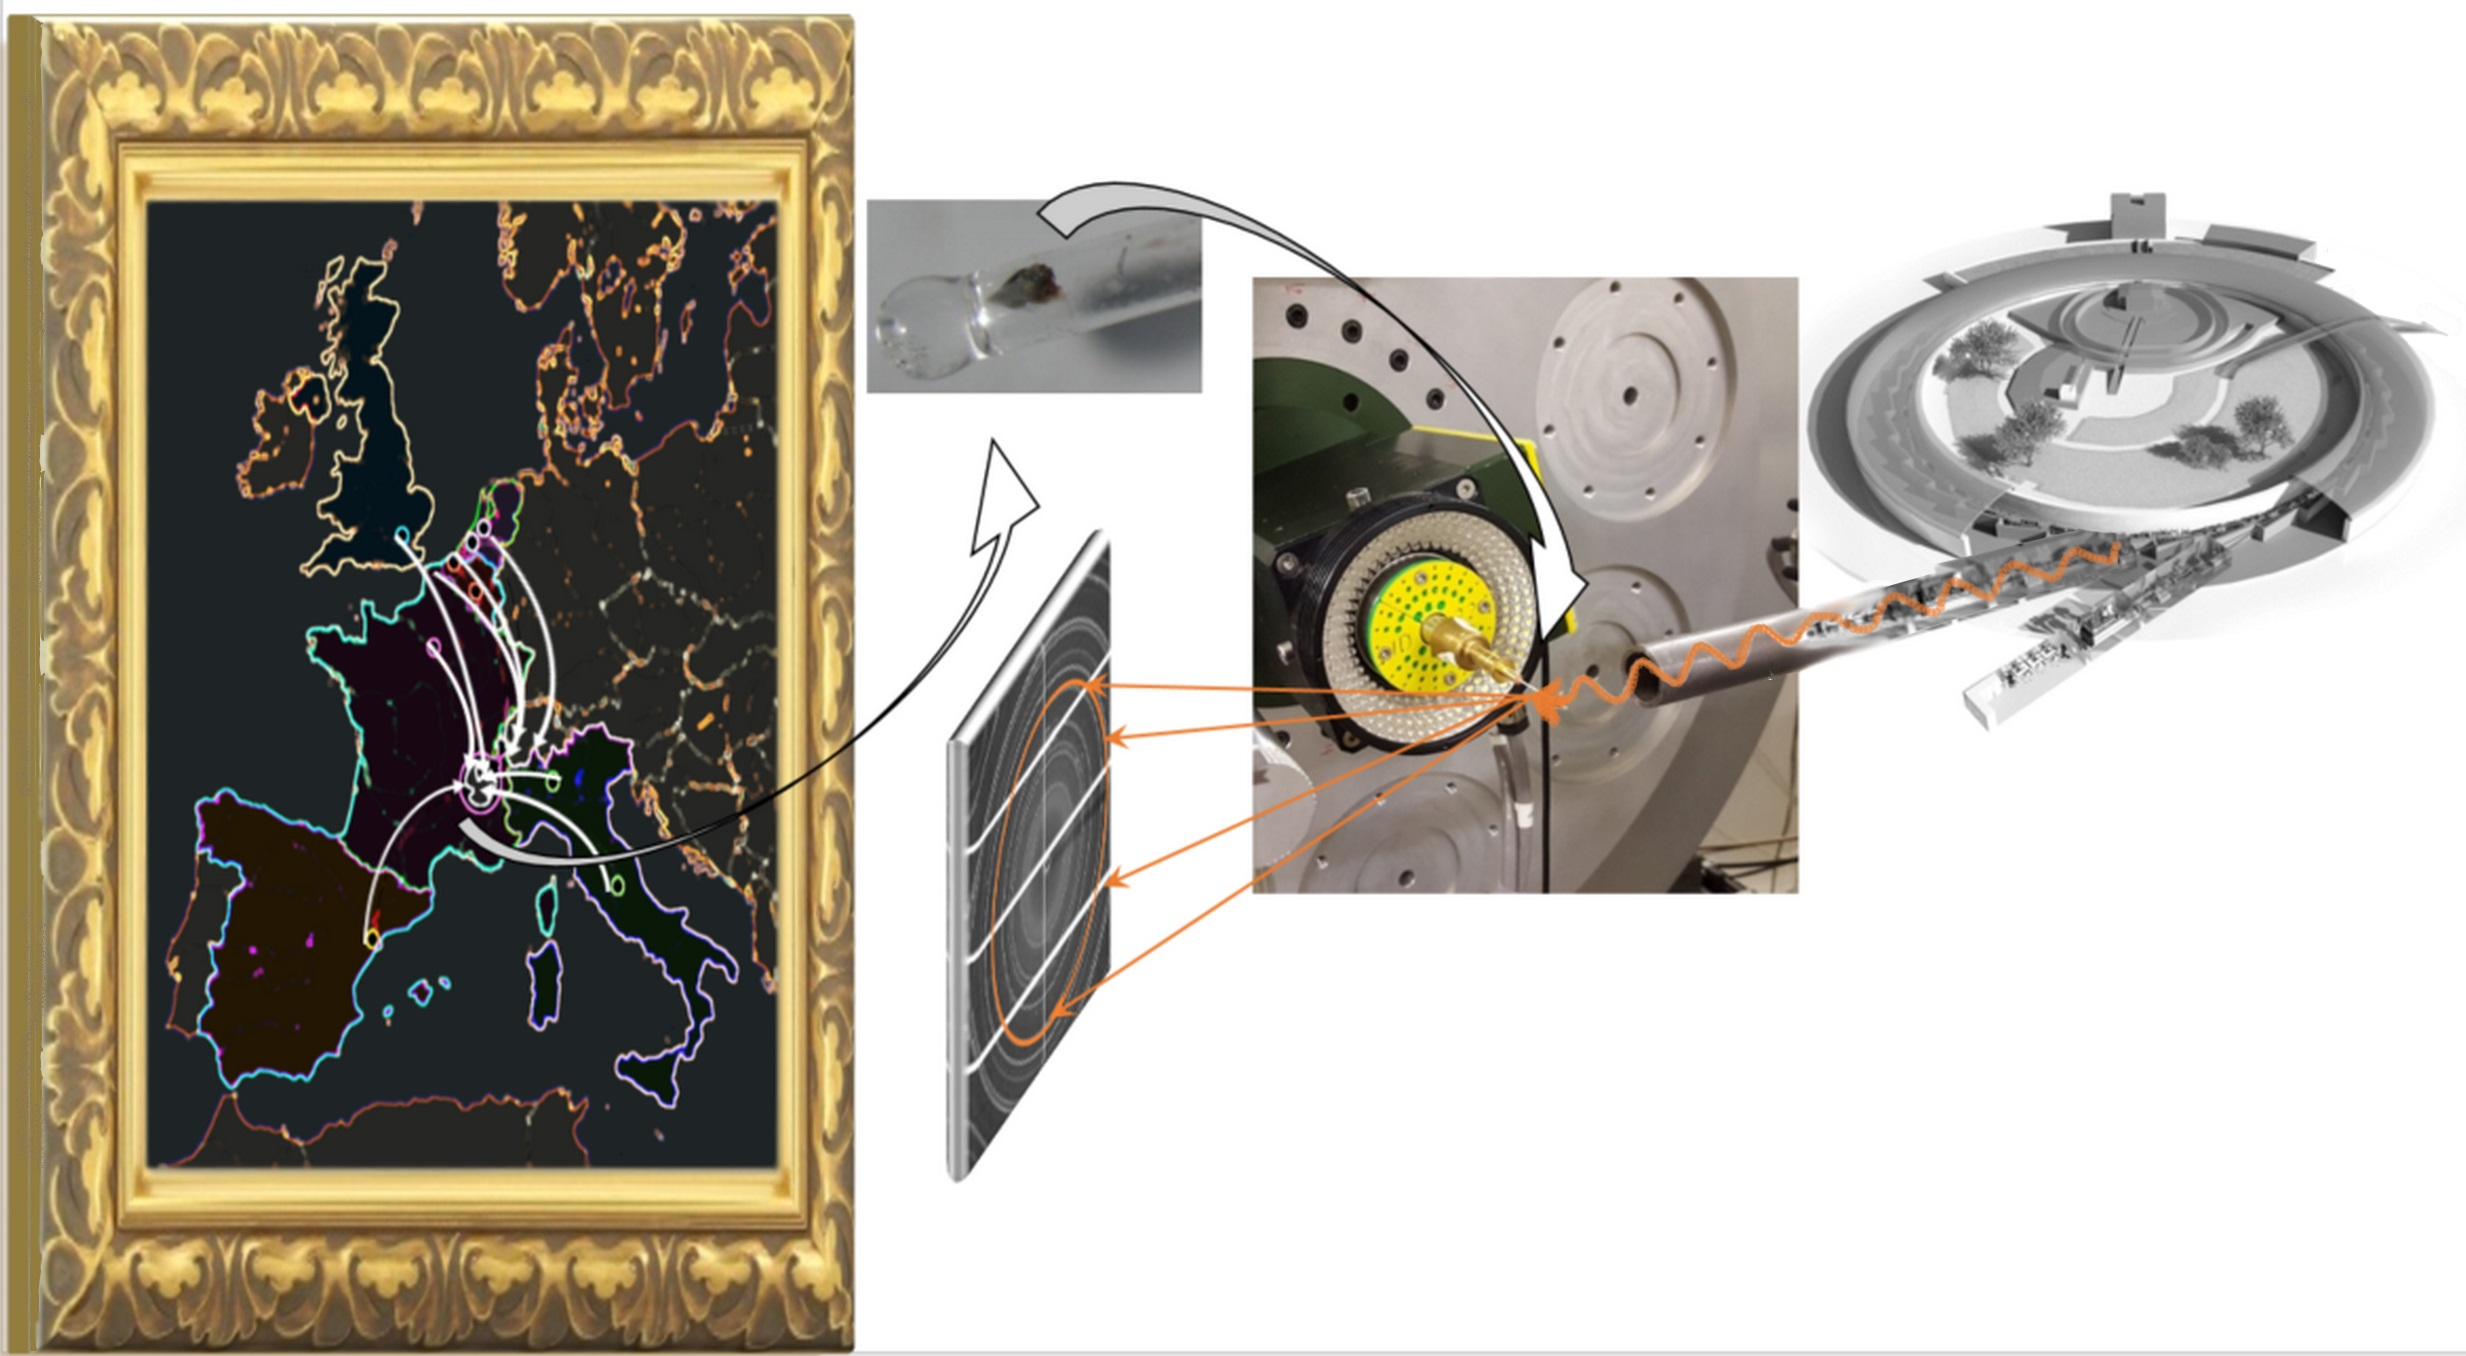 Molecules | Free Full-Text | The &ldquo;Historical Materials BAG&rdquo;: A  New Facilitated Access to Synchrotron X-ray Diffraction Analyses for  Cultural Heritage Materials at the European Synchrotron Radiation Facility